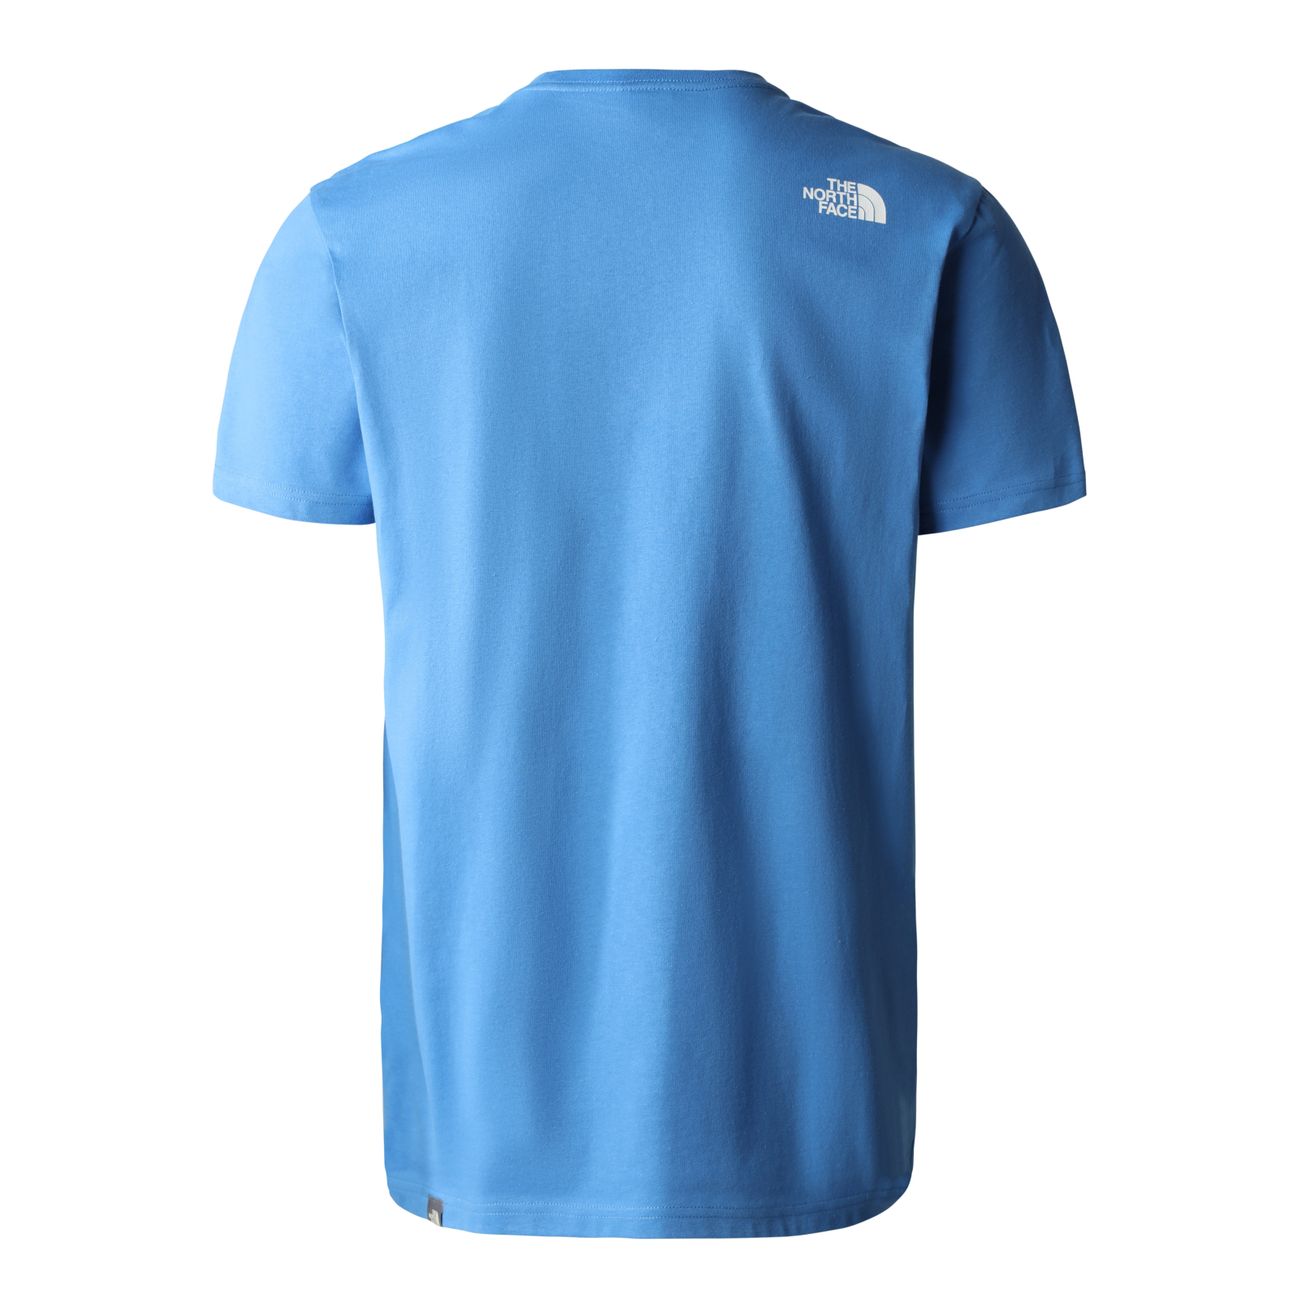 THE NORTH FACE M S/S WOODCUT DOME TEE Herren T-Shirt - The North Face - SAGATOO - 196249650745